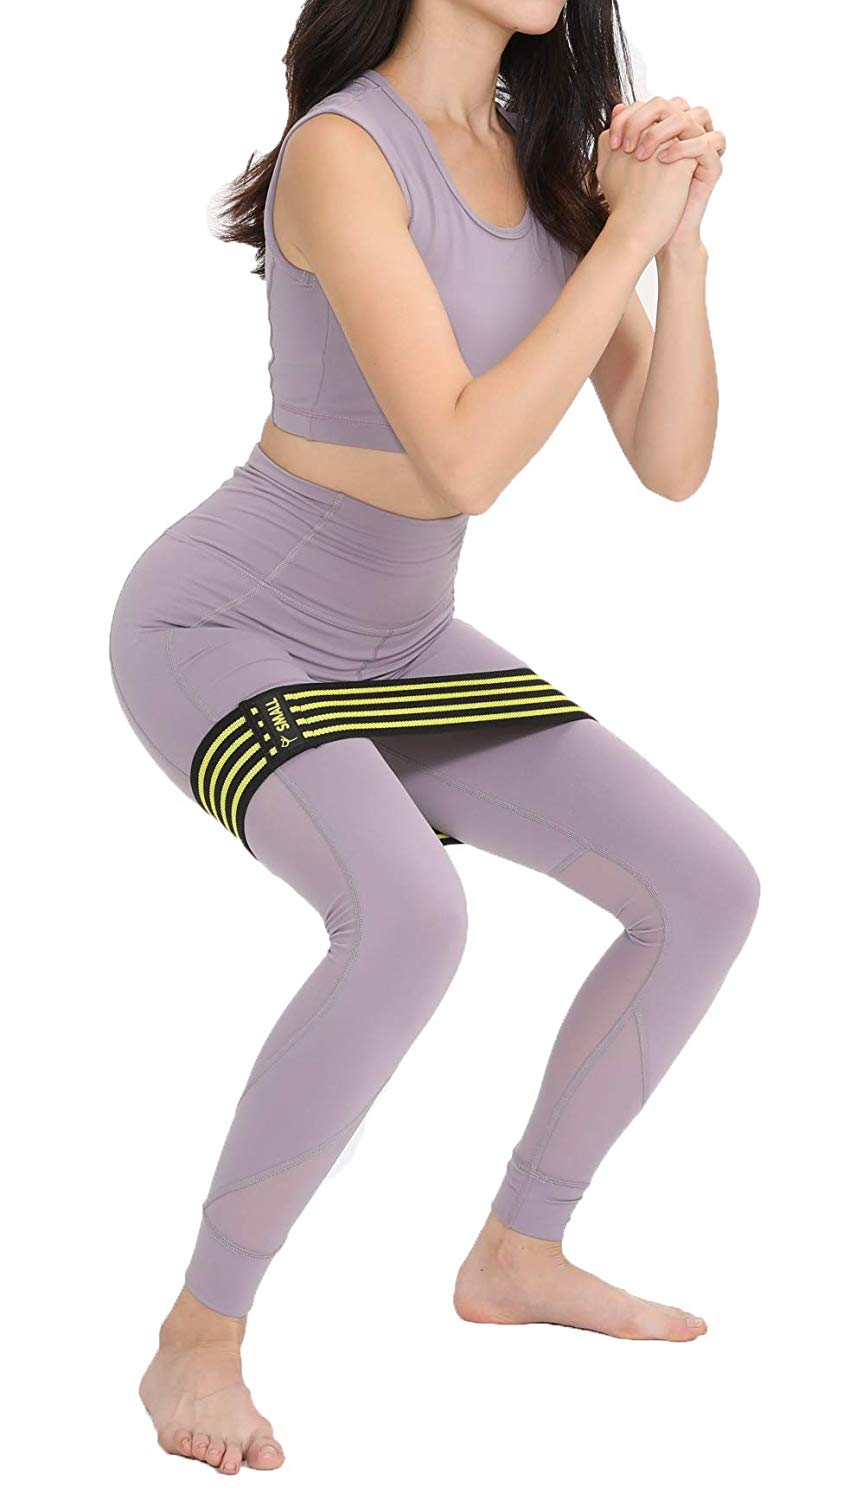 Resistance Hip Bands for Women - Set of 3 - Non-Slip Circle Loop Booty -  iRibit Fitness